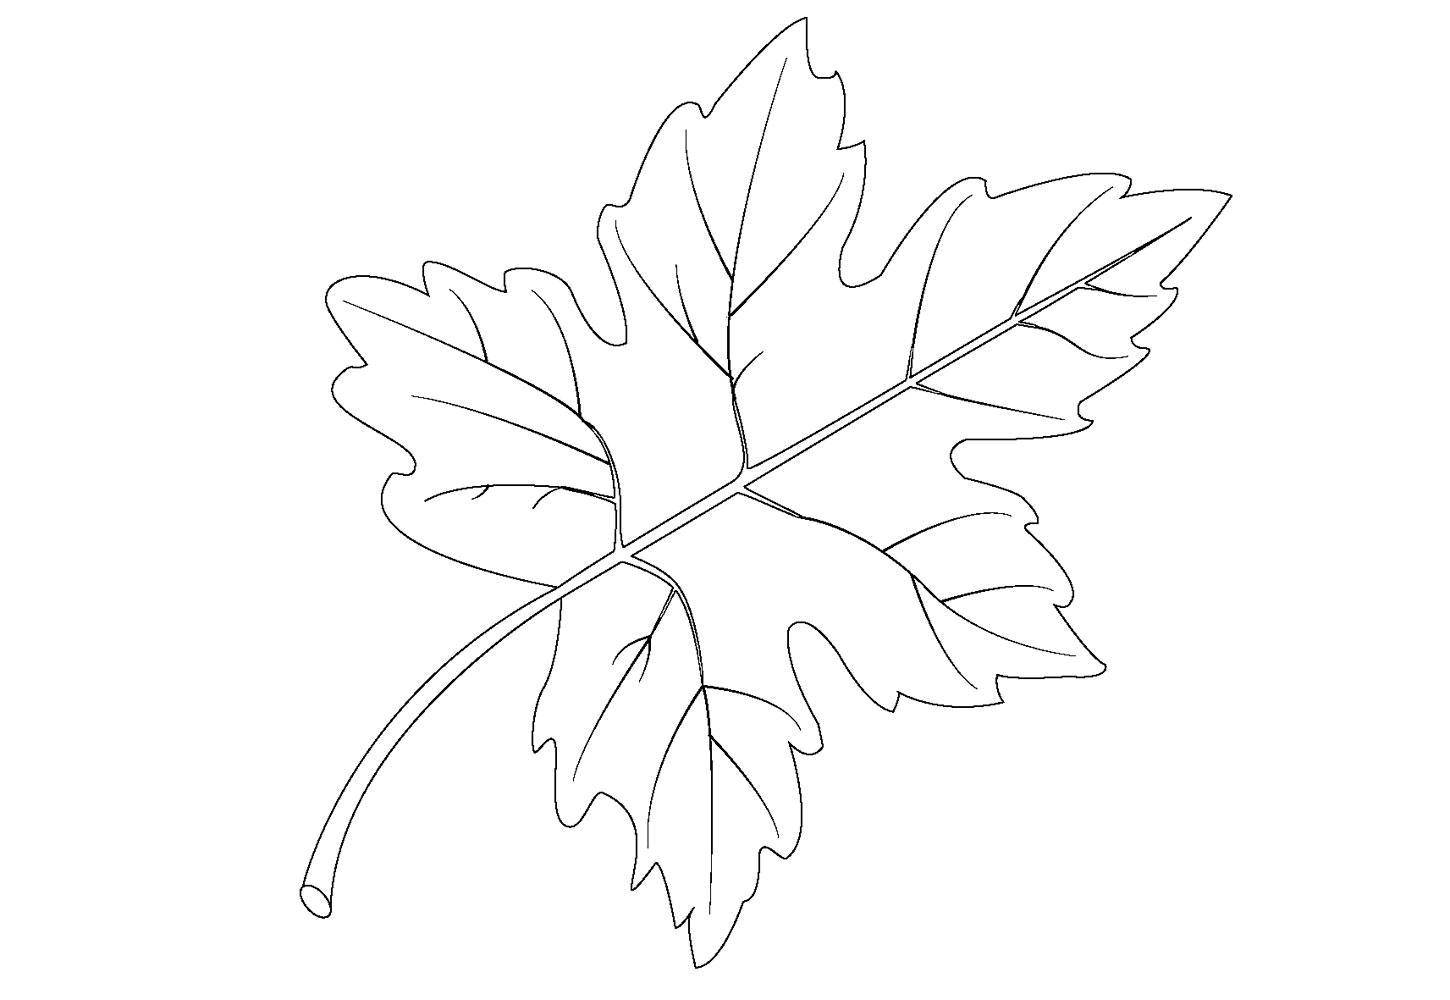 Coloring Maple leaf. Category leaves. Tags:  Leaves, tree.